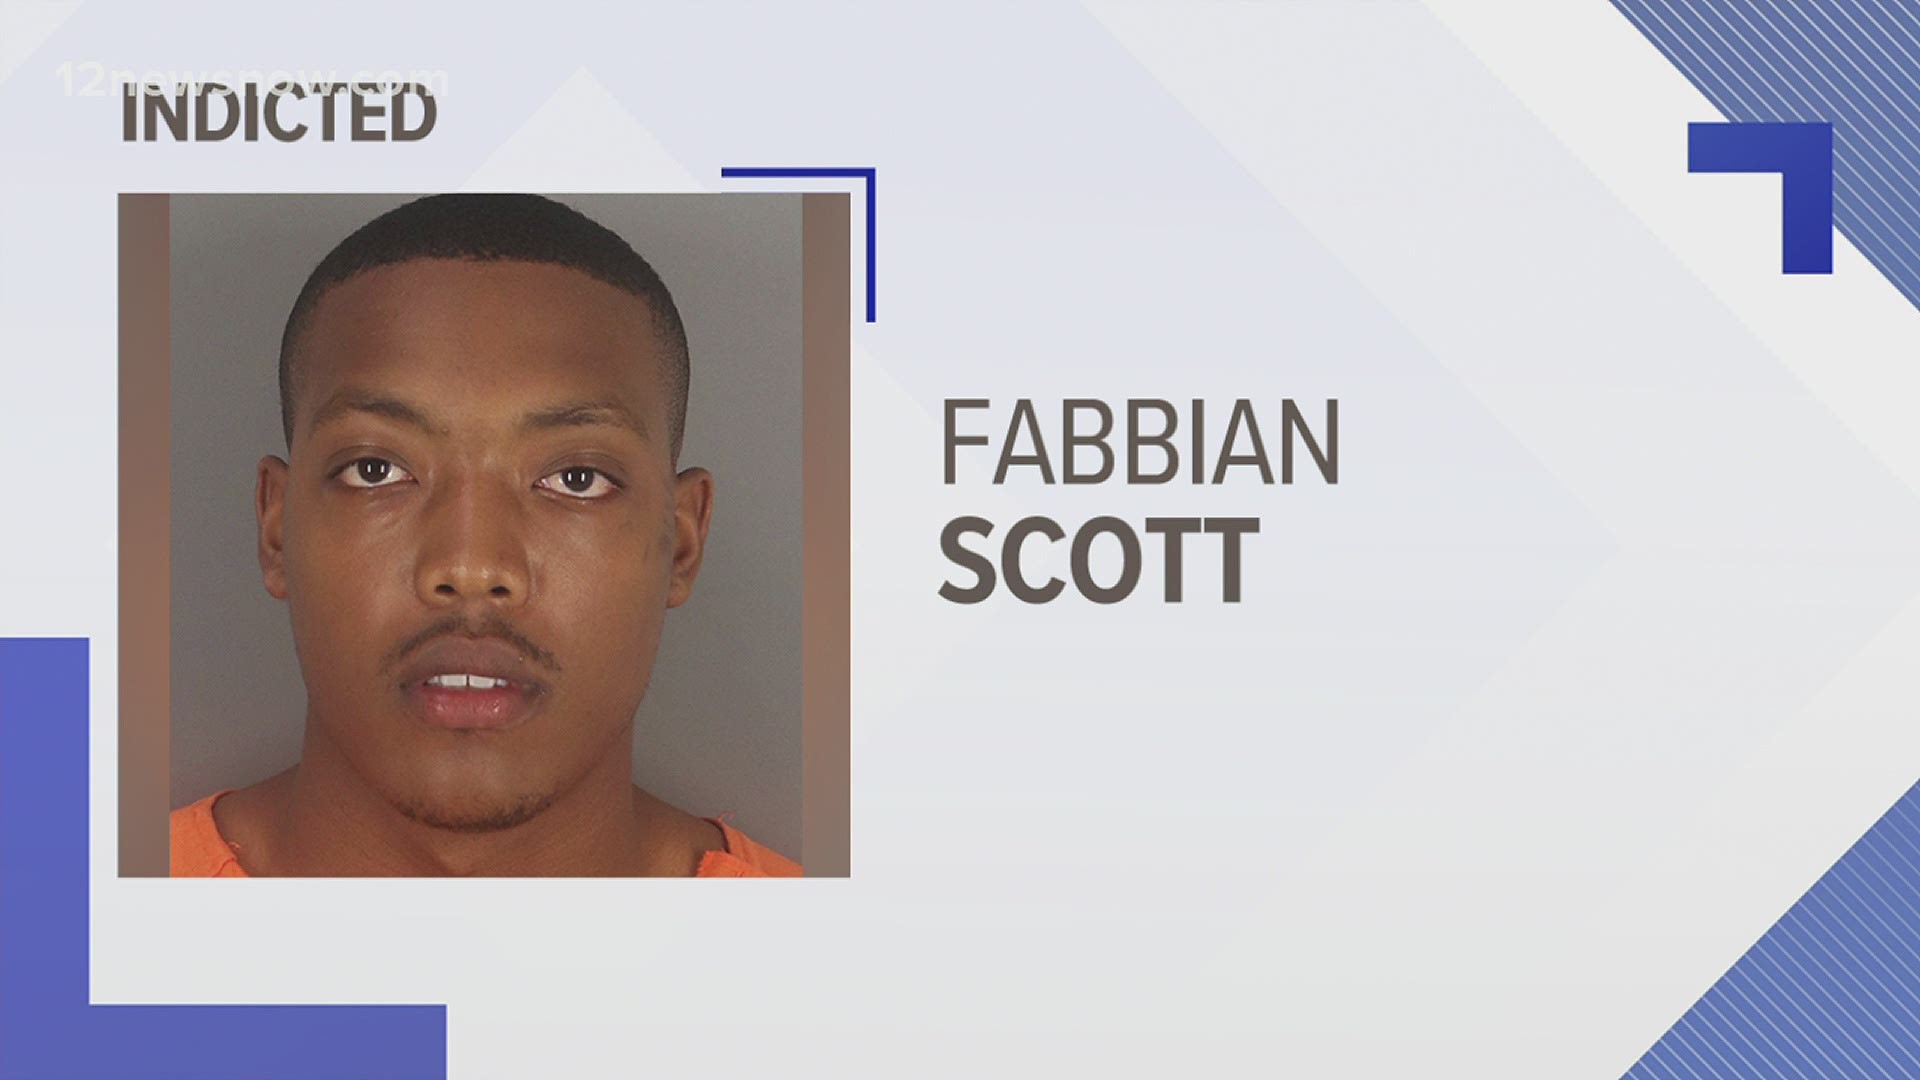 Officers arrested Fabbian Scott after a tip from the national human trafficking hotline.